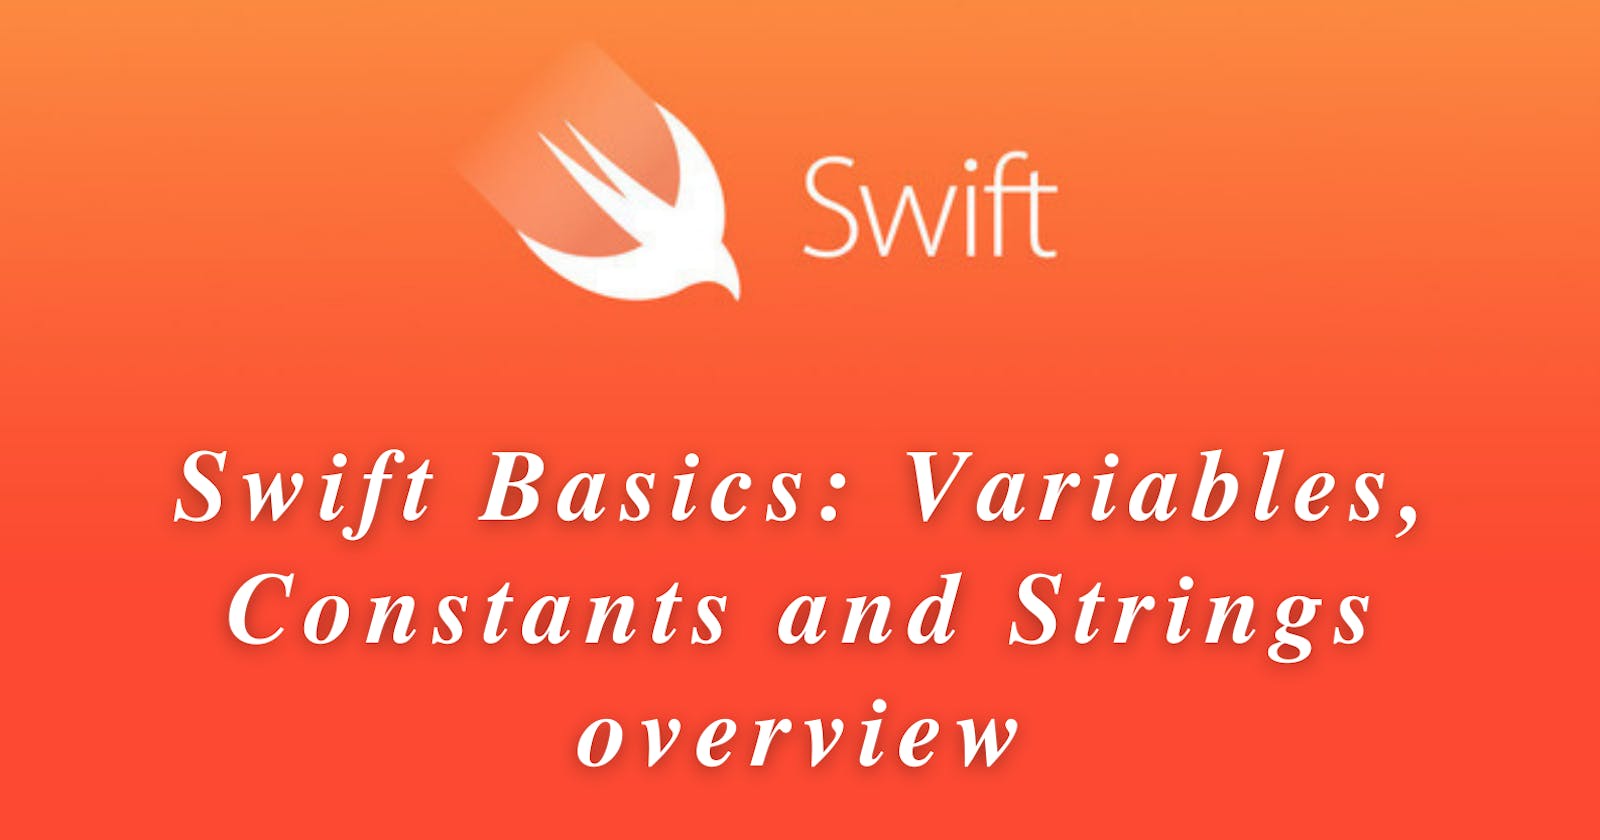 Swift Basics: Variables, Constants and Strings overview